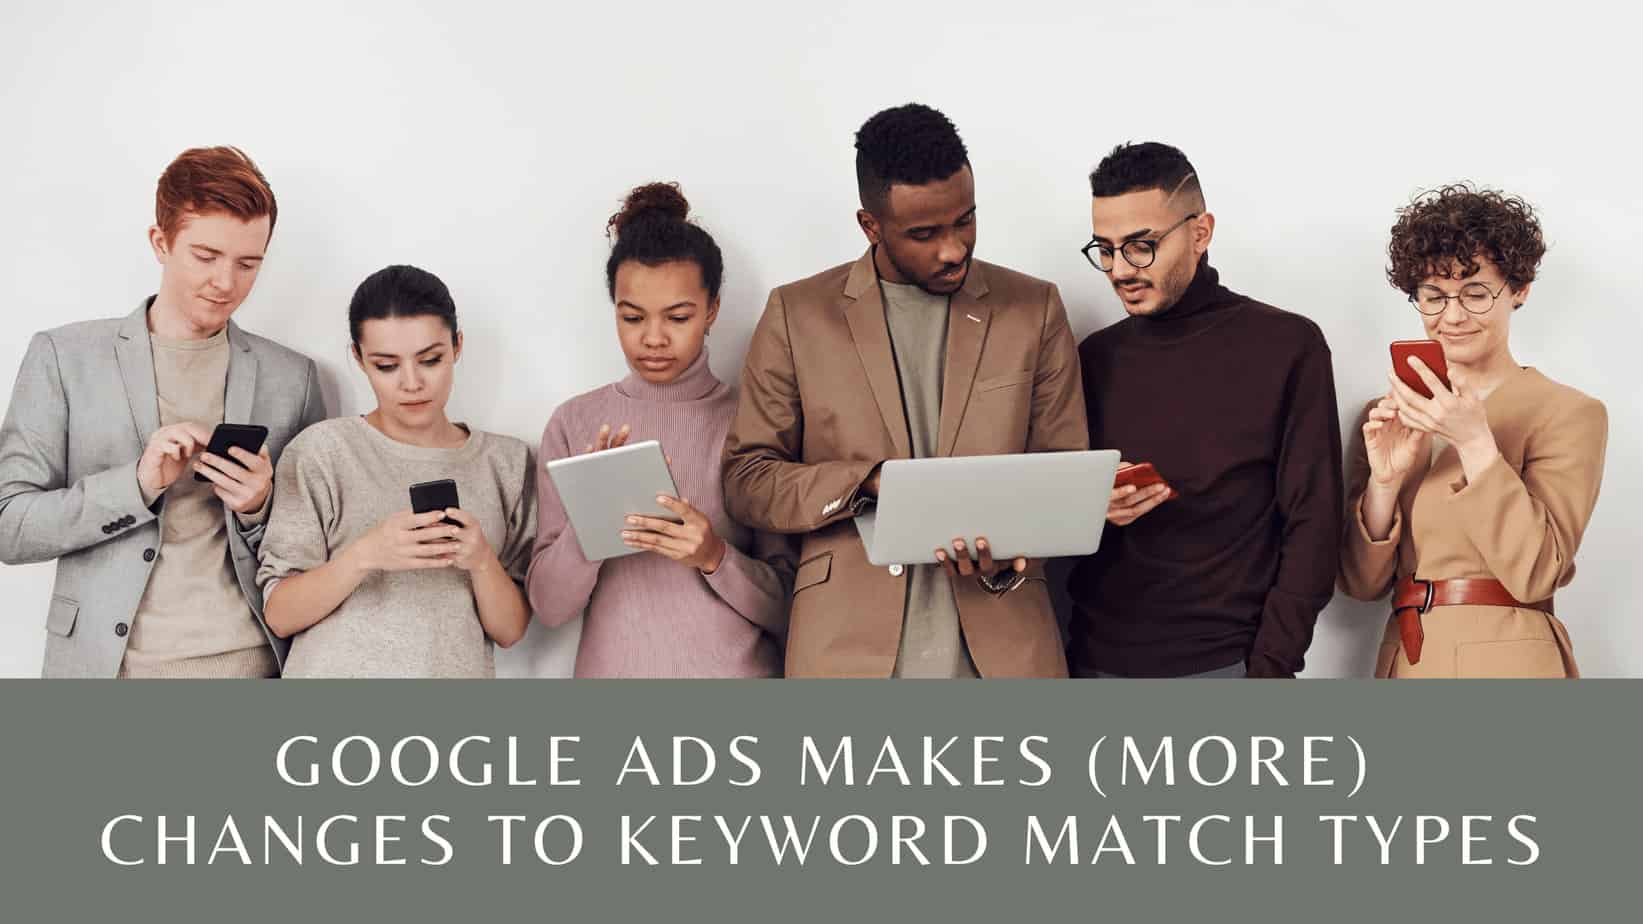 Featured image for “Google Ads Makes (More) Changes to Keyword Match Types”